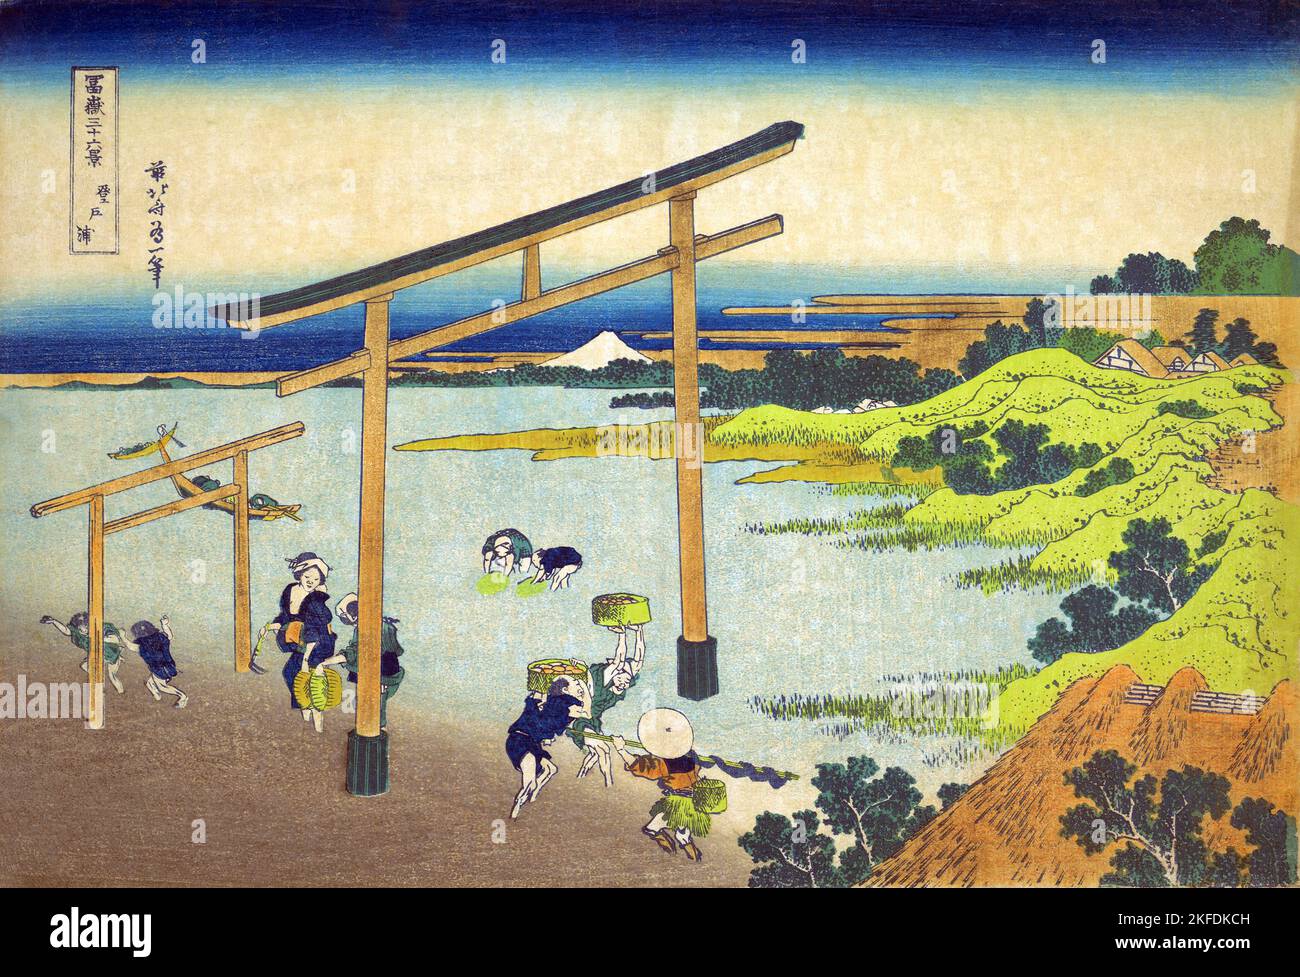 Japan: ‘Noboto Bay’. Ukiyo-e woodblock print from the series ‘Thirty-Six Views of Mount Fuji’ by Katsushika Hokusai (31 October 1760 - 10 May 1849), 1830.  ‘Thirty-six Views of Mount Fuji’ is an ‘ukiyo-e’ series of woodcut prints by Japanese artist Katsushika Hokusai. The series depicts Mount Fuji in differing seasons and weather conditions from a variety of places and distances. It actually consists of 46 prints created between 1826 and 1833. The first 36 were included in the original publication and, due to their popularity, 10 more were added after the original publication. Stock Photo